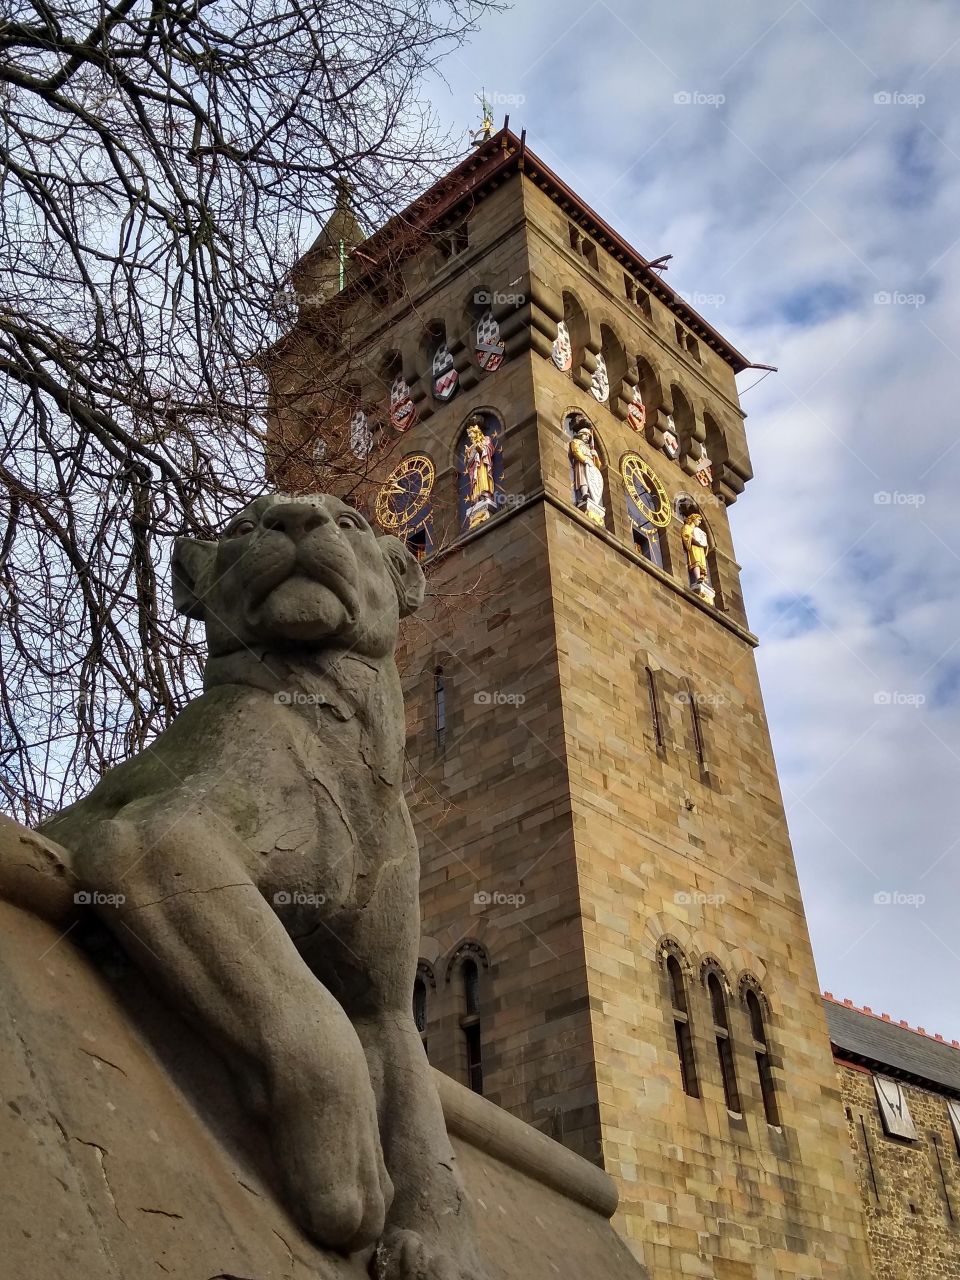 Lioness guarding the tower